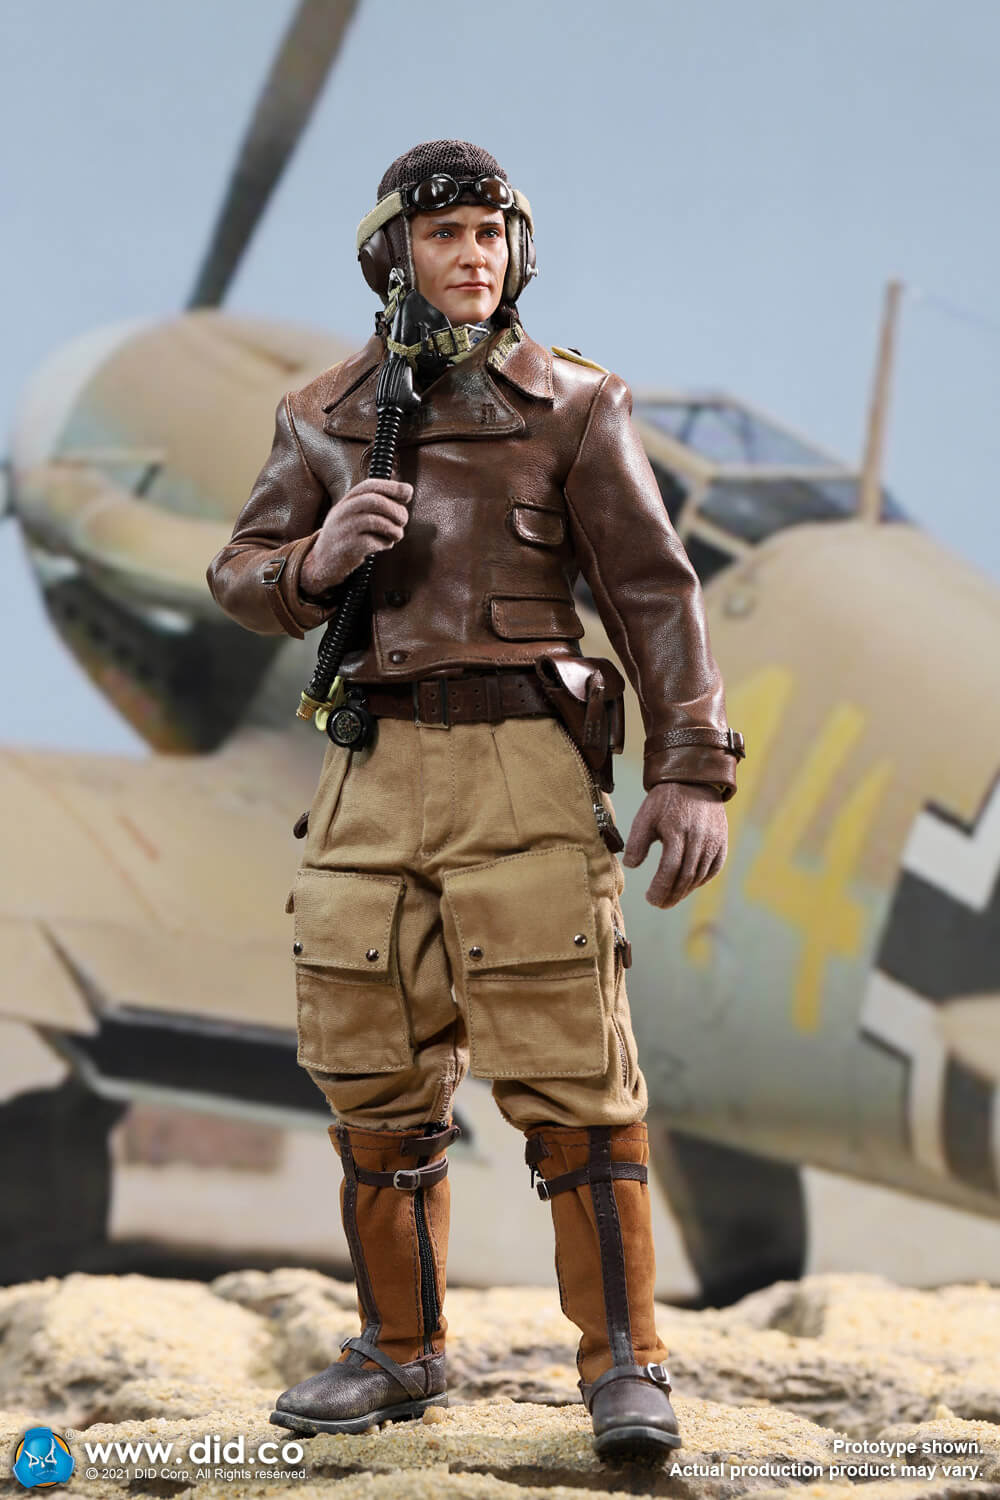 NEW PRODUCT: D80154 WWII German Luftwaffe Flying Ace “Star Of Africa” – Hans-Joachim Marseille & E60060  Diorama Of “Star Of Africa” 11575